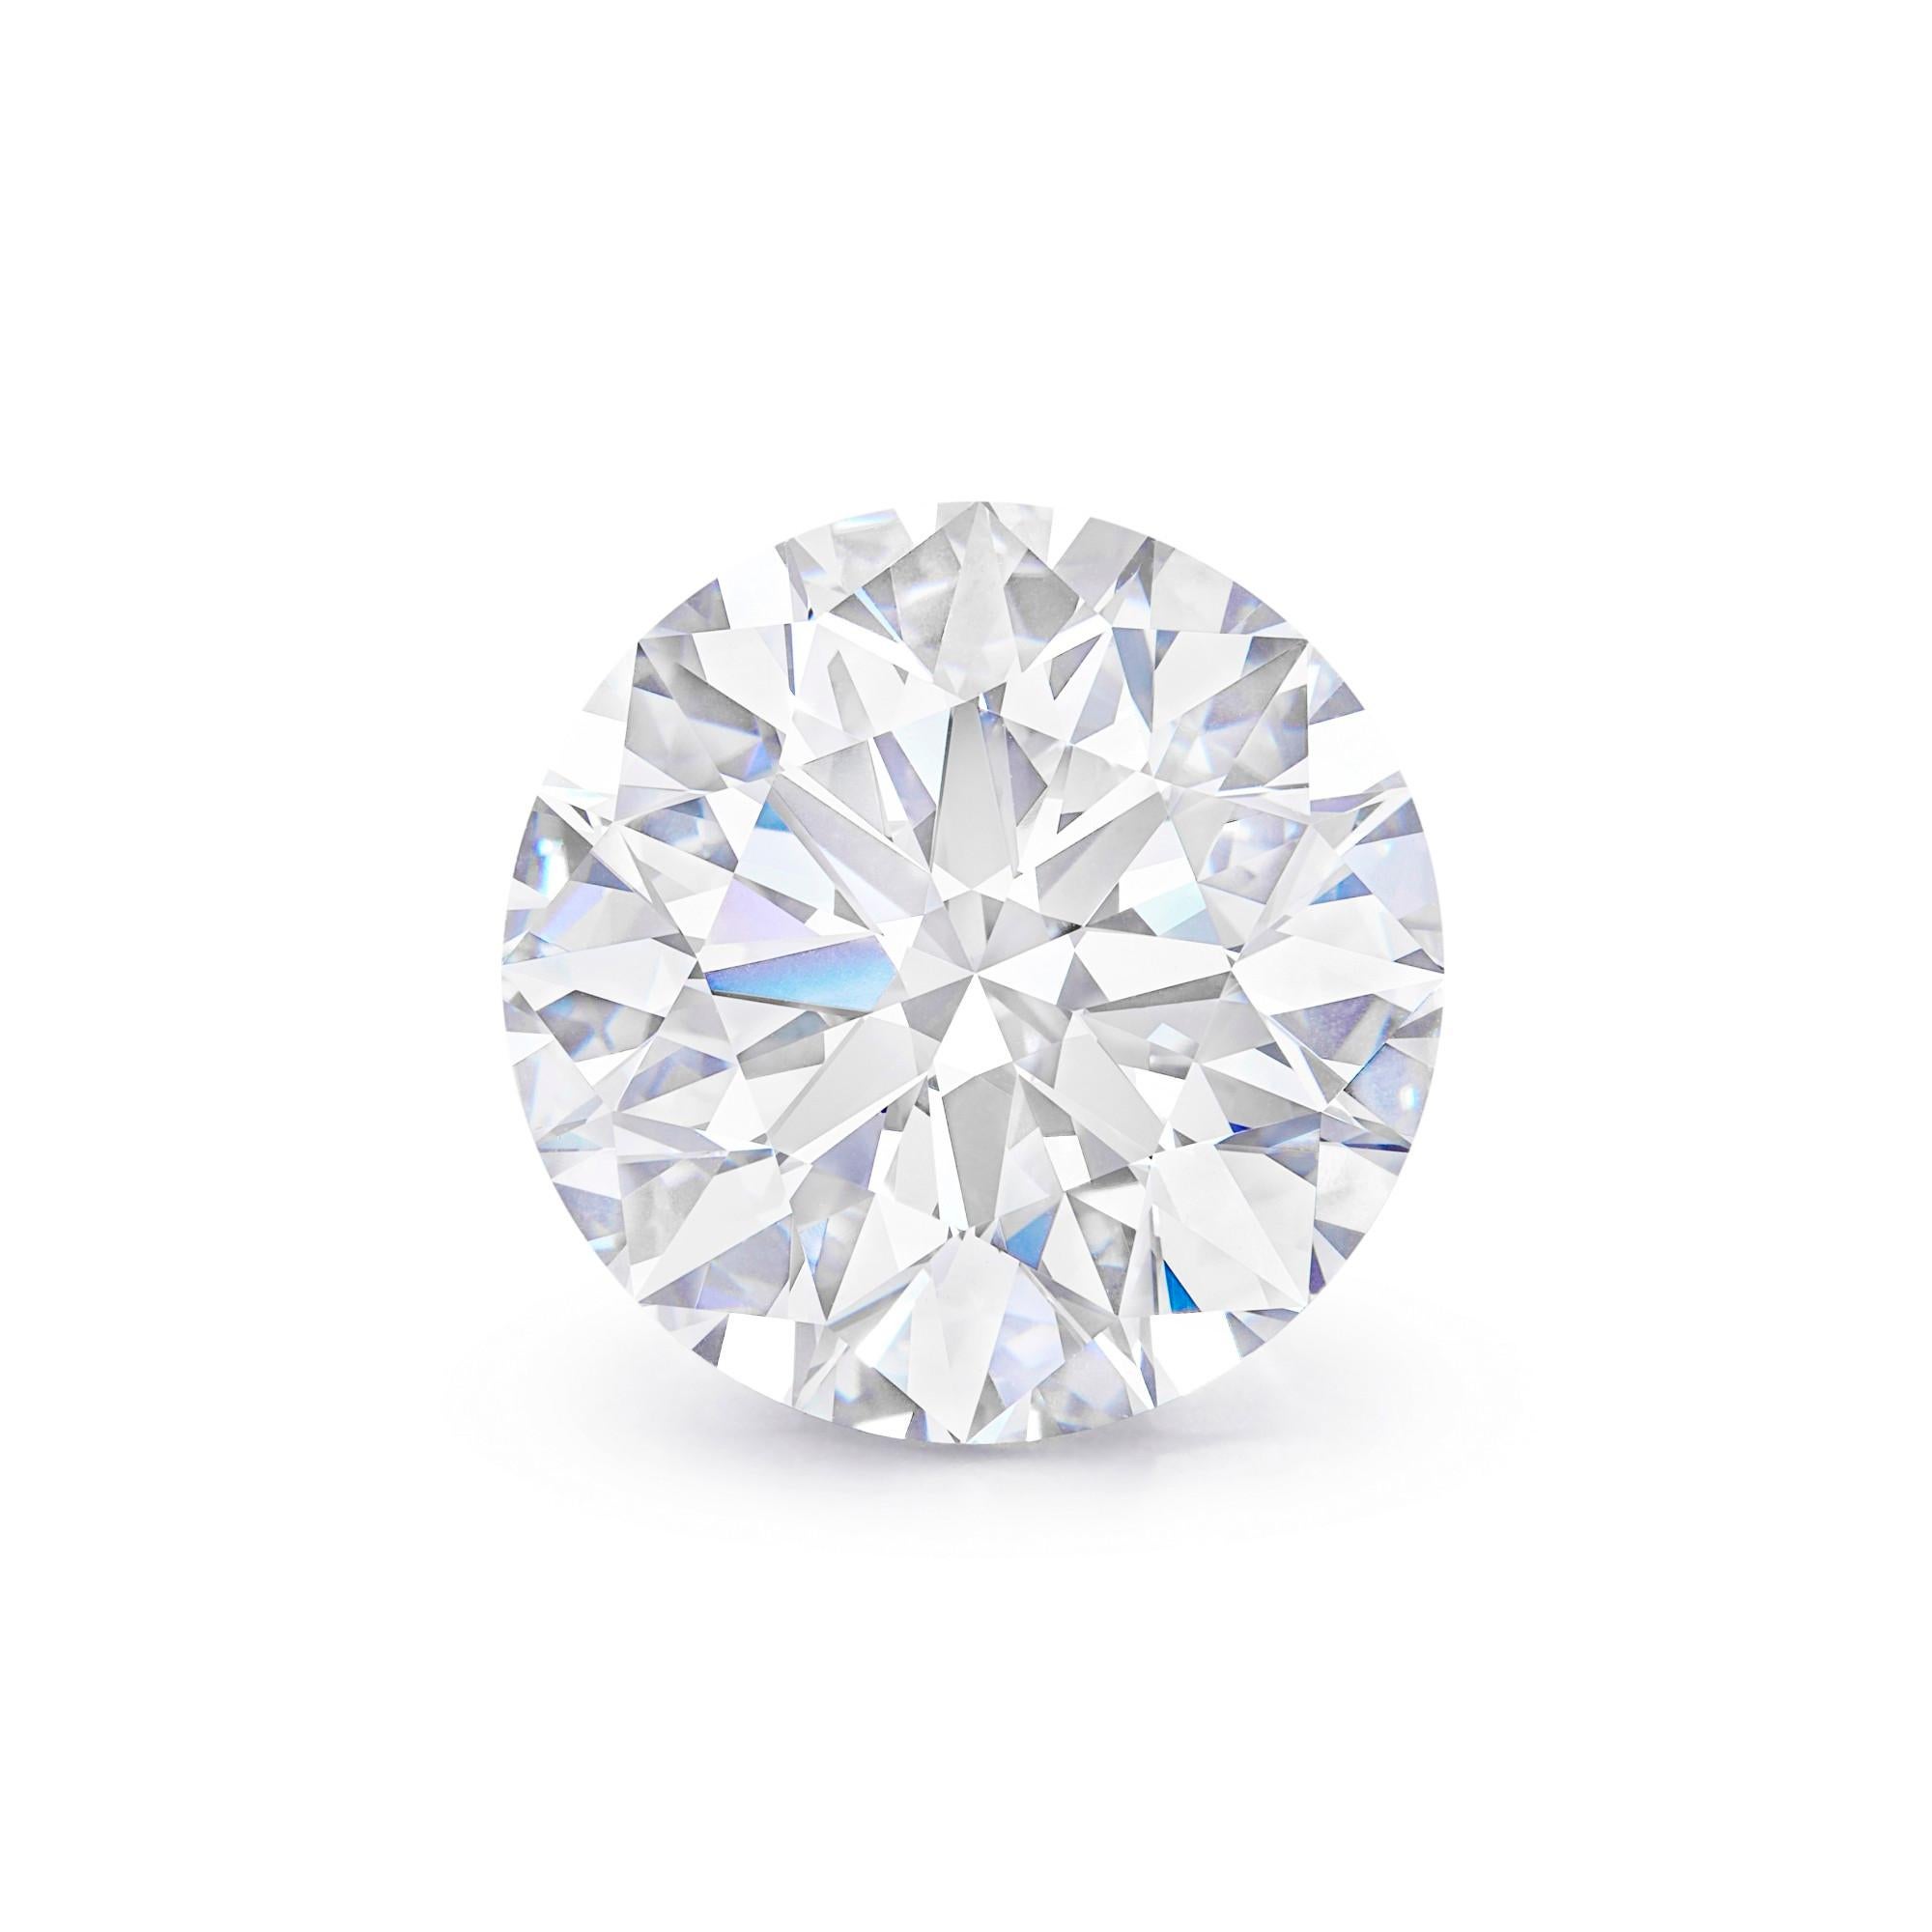 Flawless loose round brilliant cut diamond, GIA certified.
We are specilized in the customization of high end jewerly made in Italy
The setting could be handcrafted by some of the most prestigious bench jewelers in Italy and designed by Antinori di